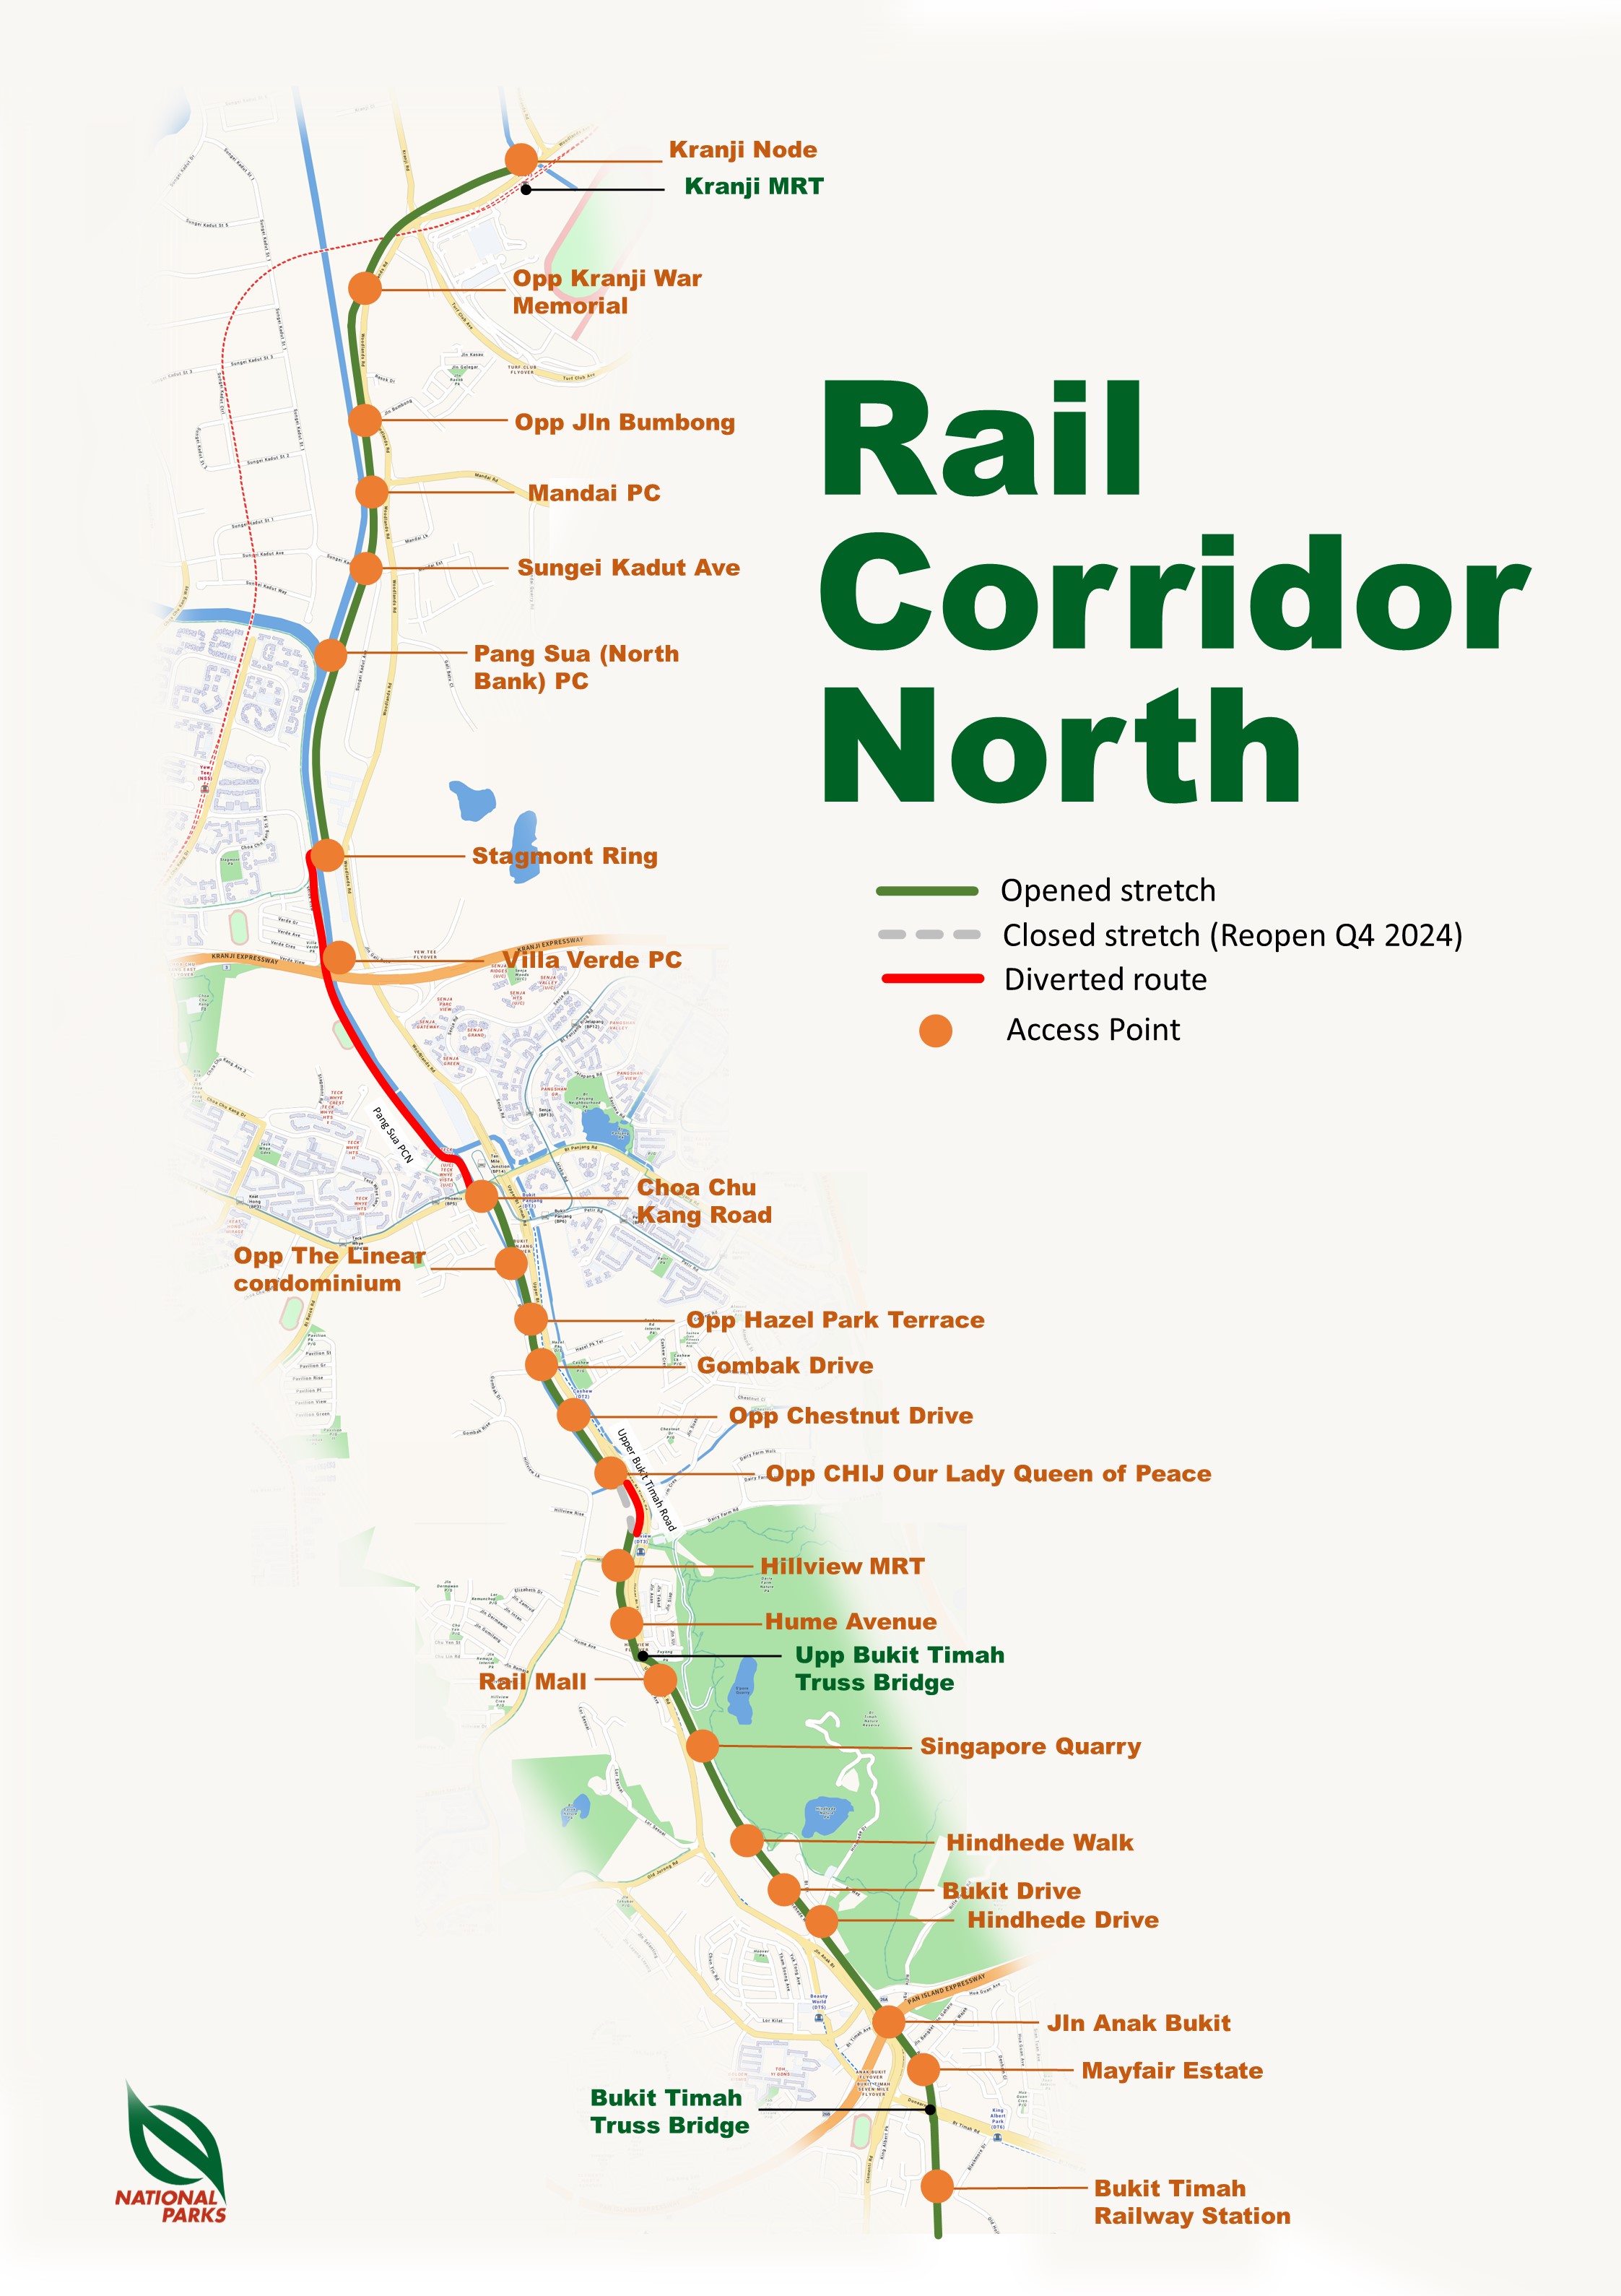 Access points for Rail Corridor North